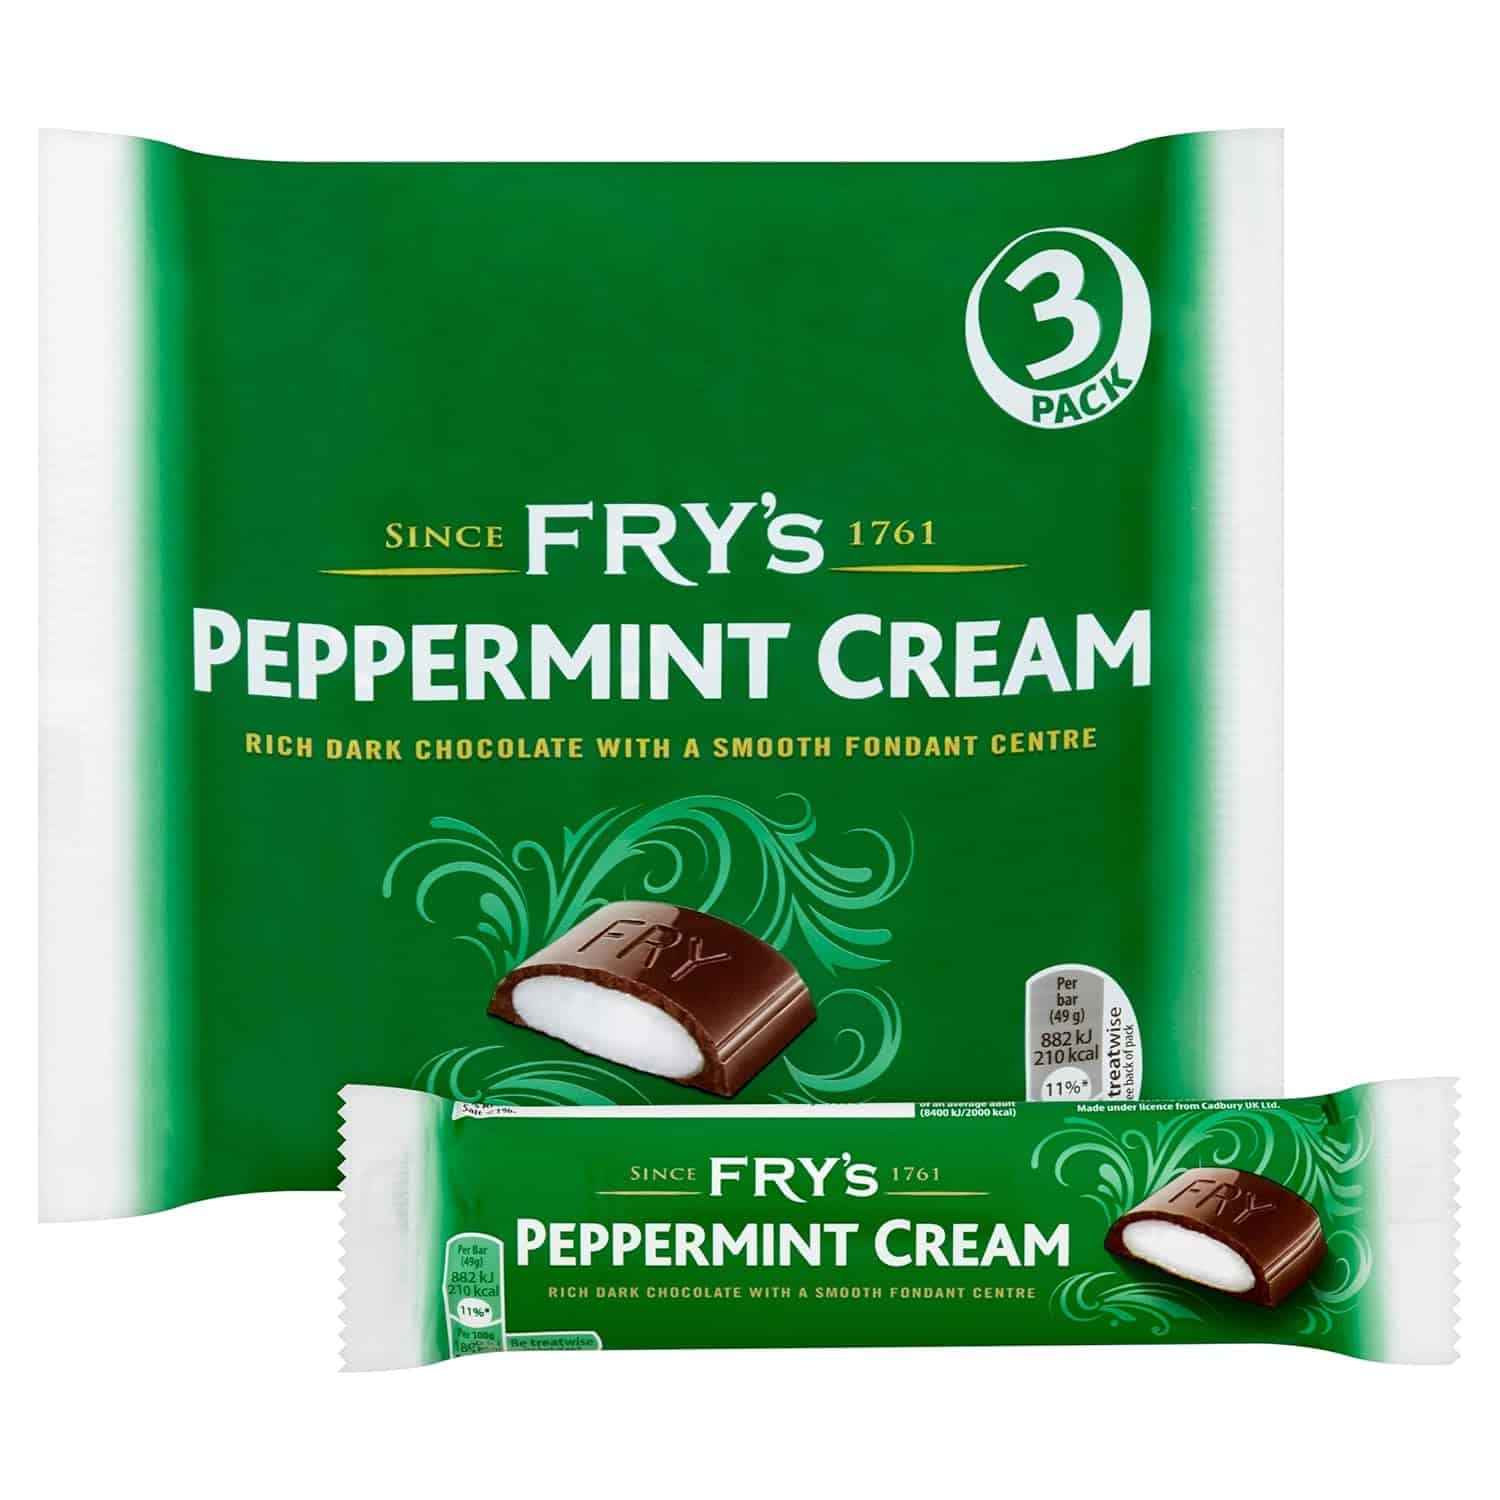 A Refreshing Delight: Peppermint Cream Fry’s 3 Pack Review